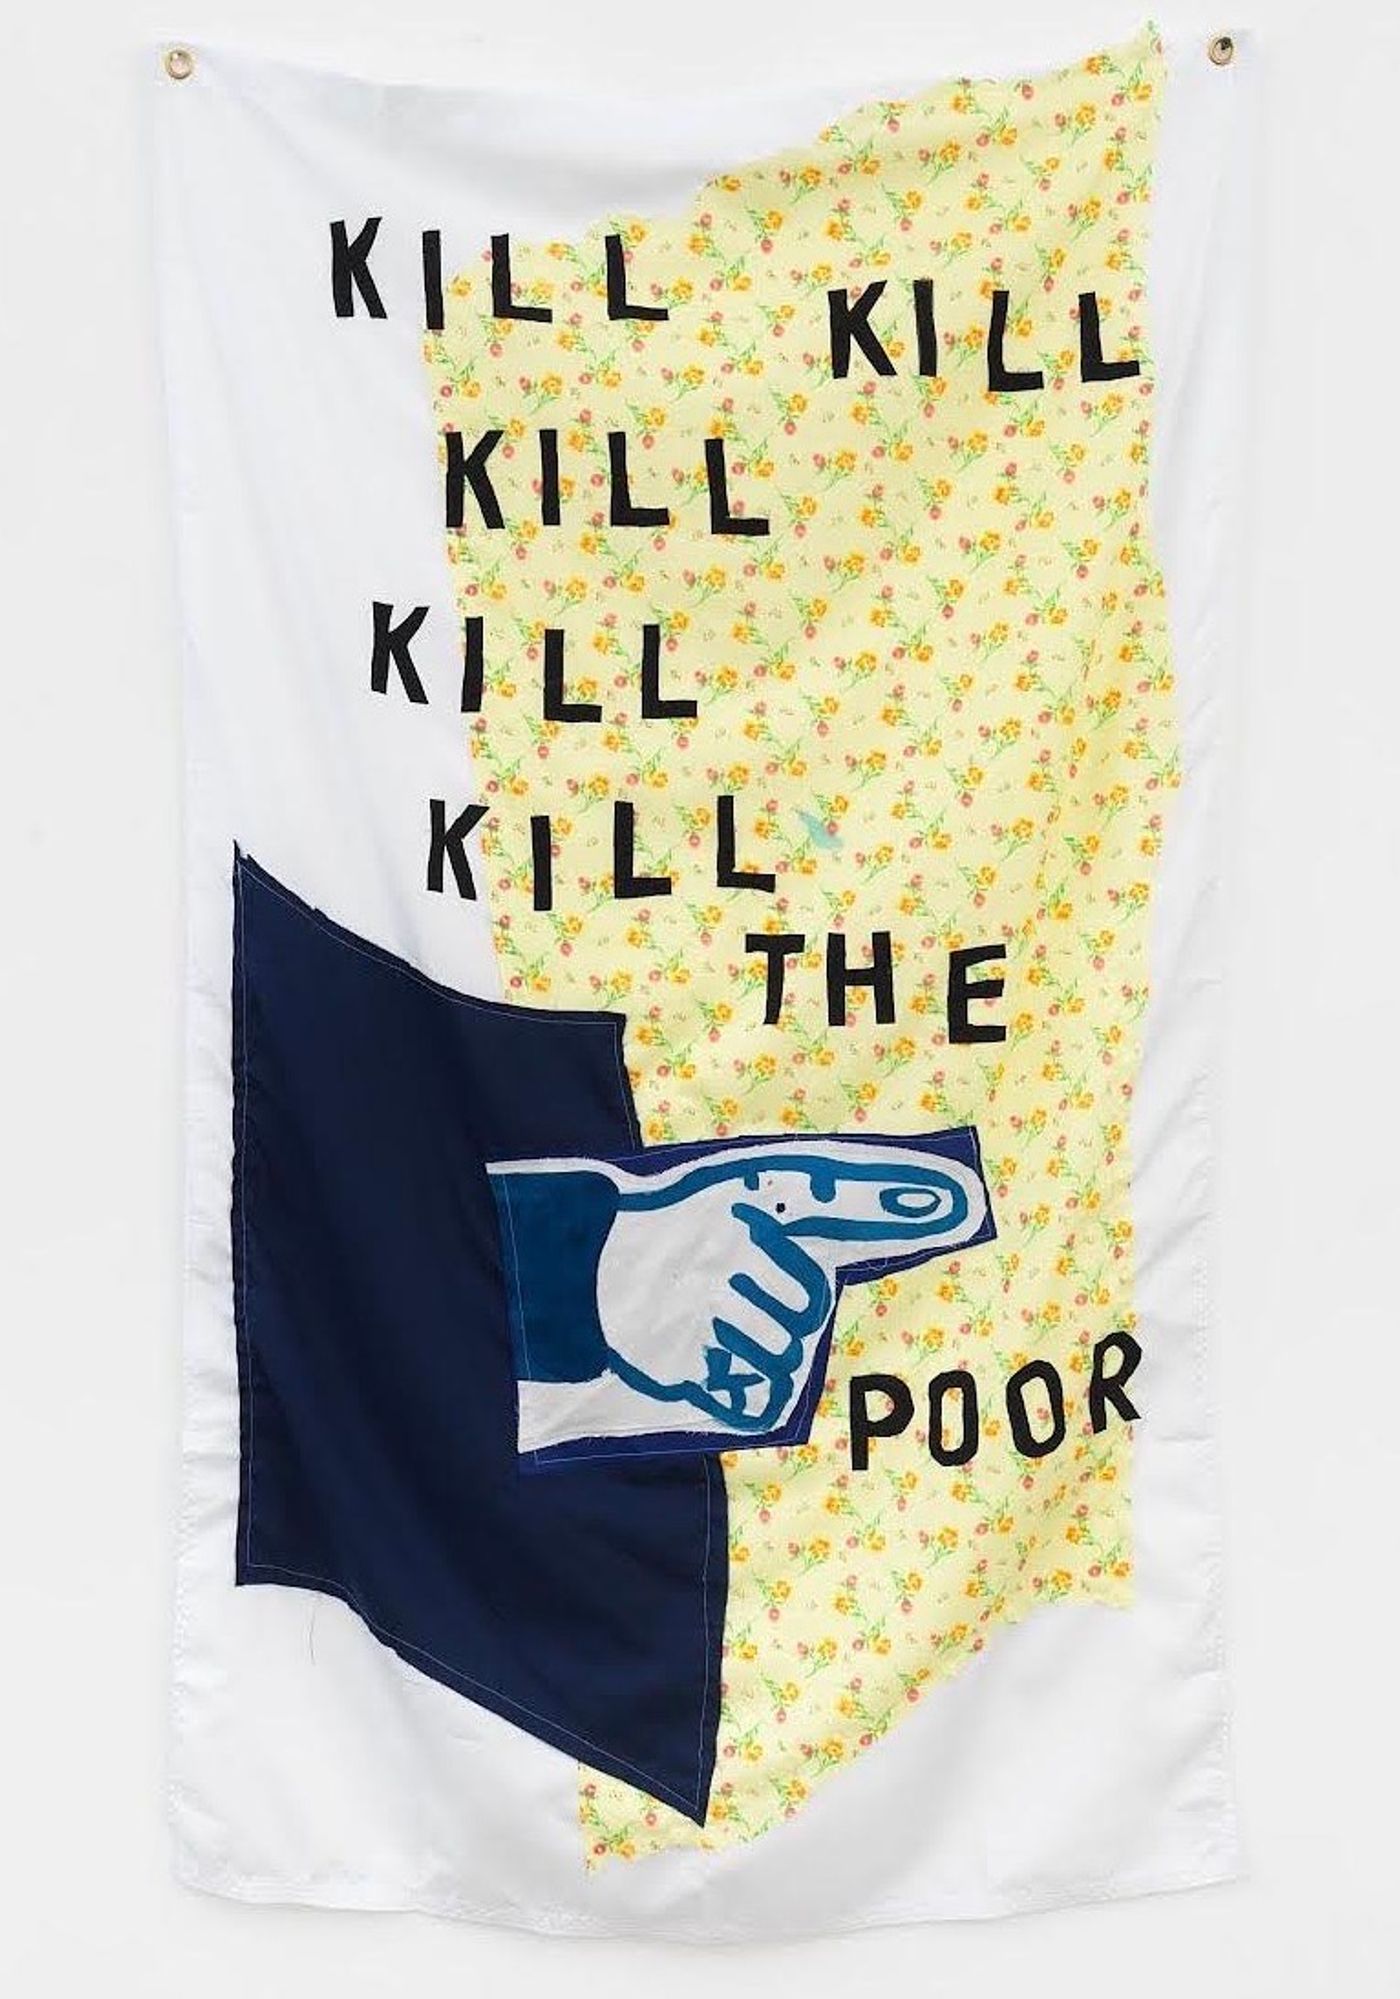 Image of Untitled (Kill), 2020: Fabric and paint on flag